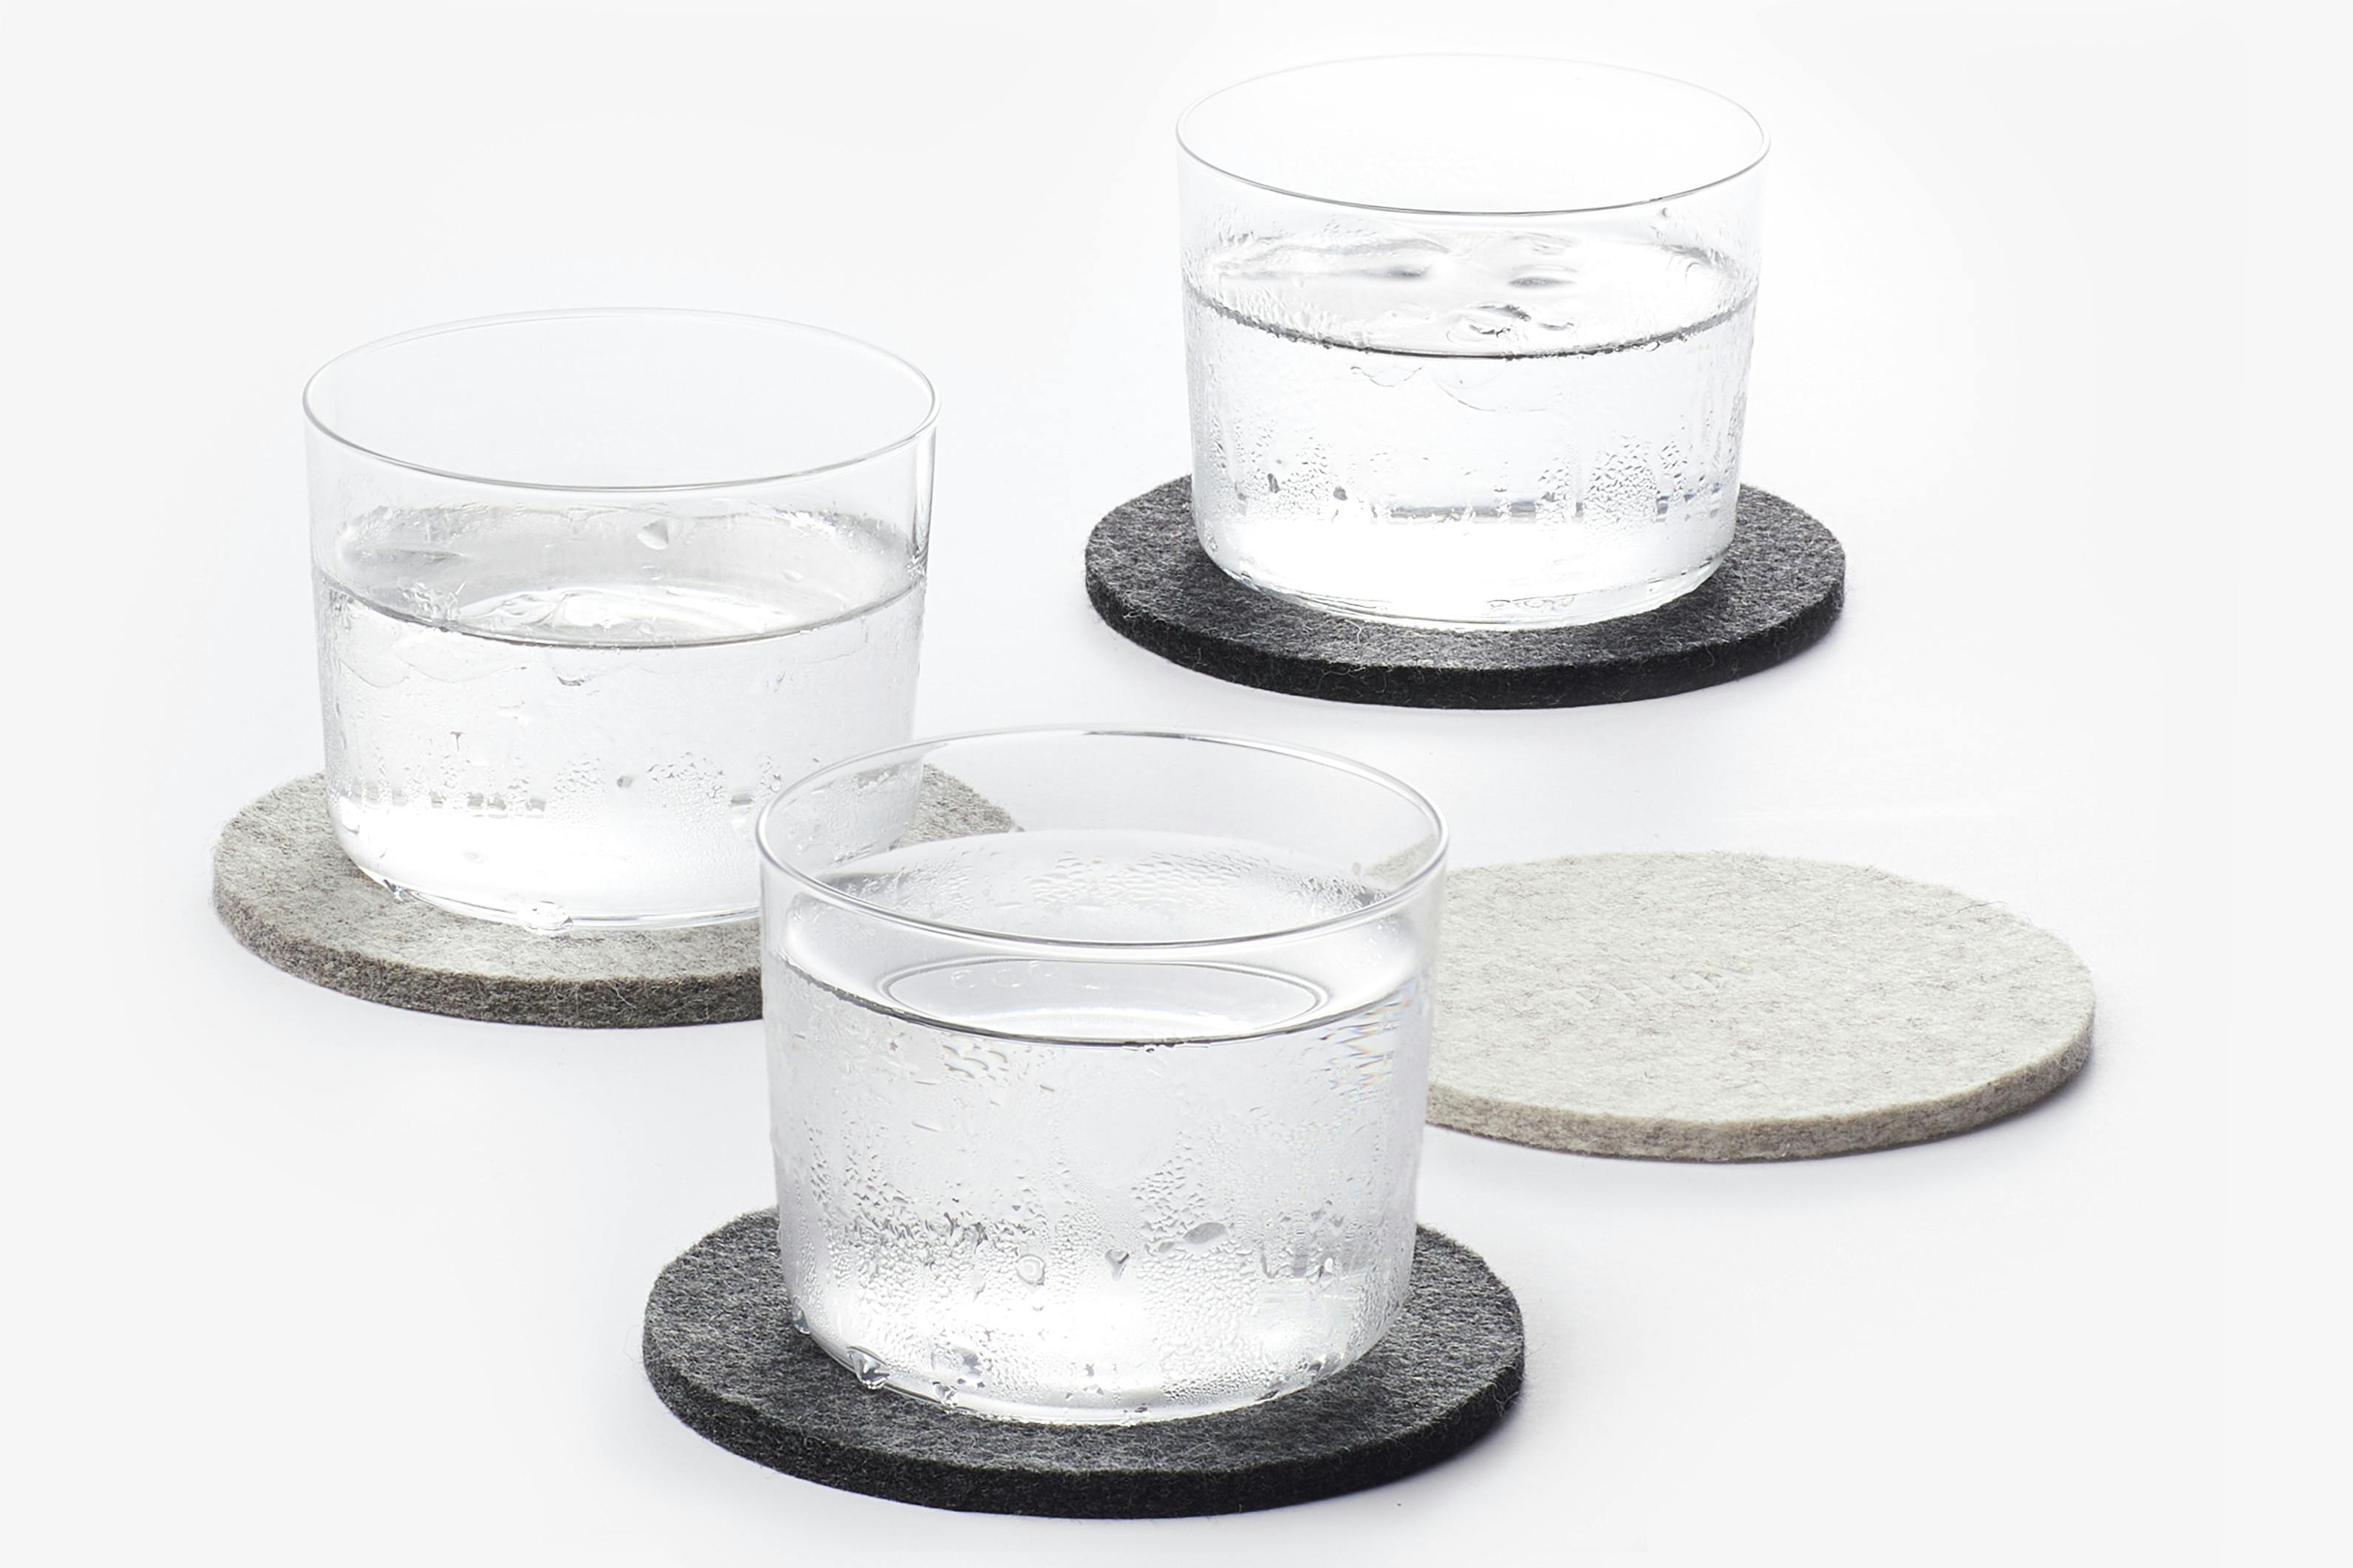 The Felt Coasters Displayed on a Table